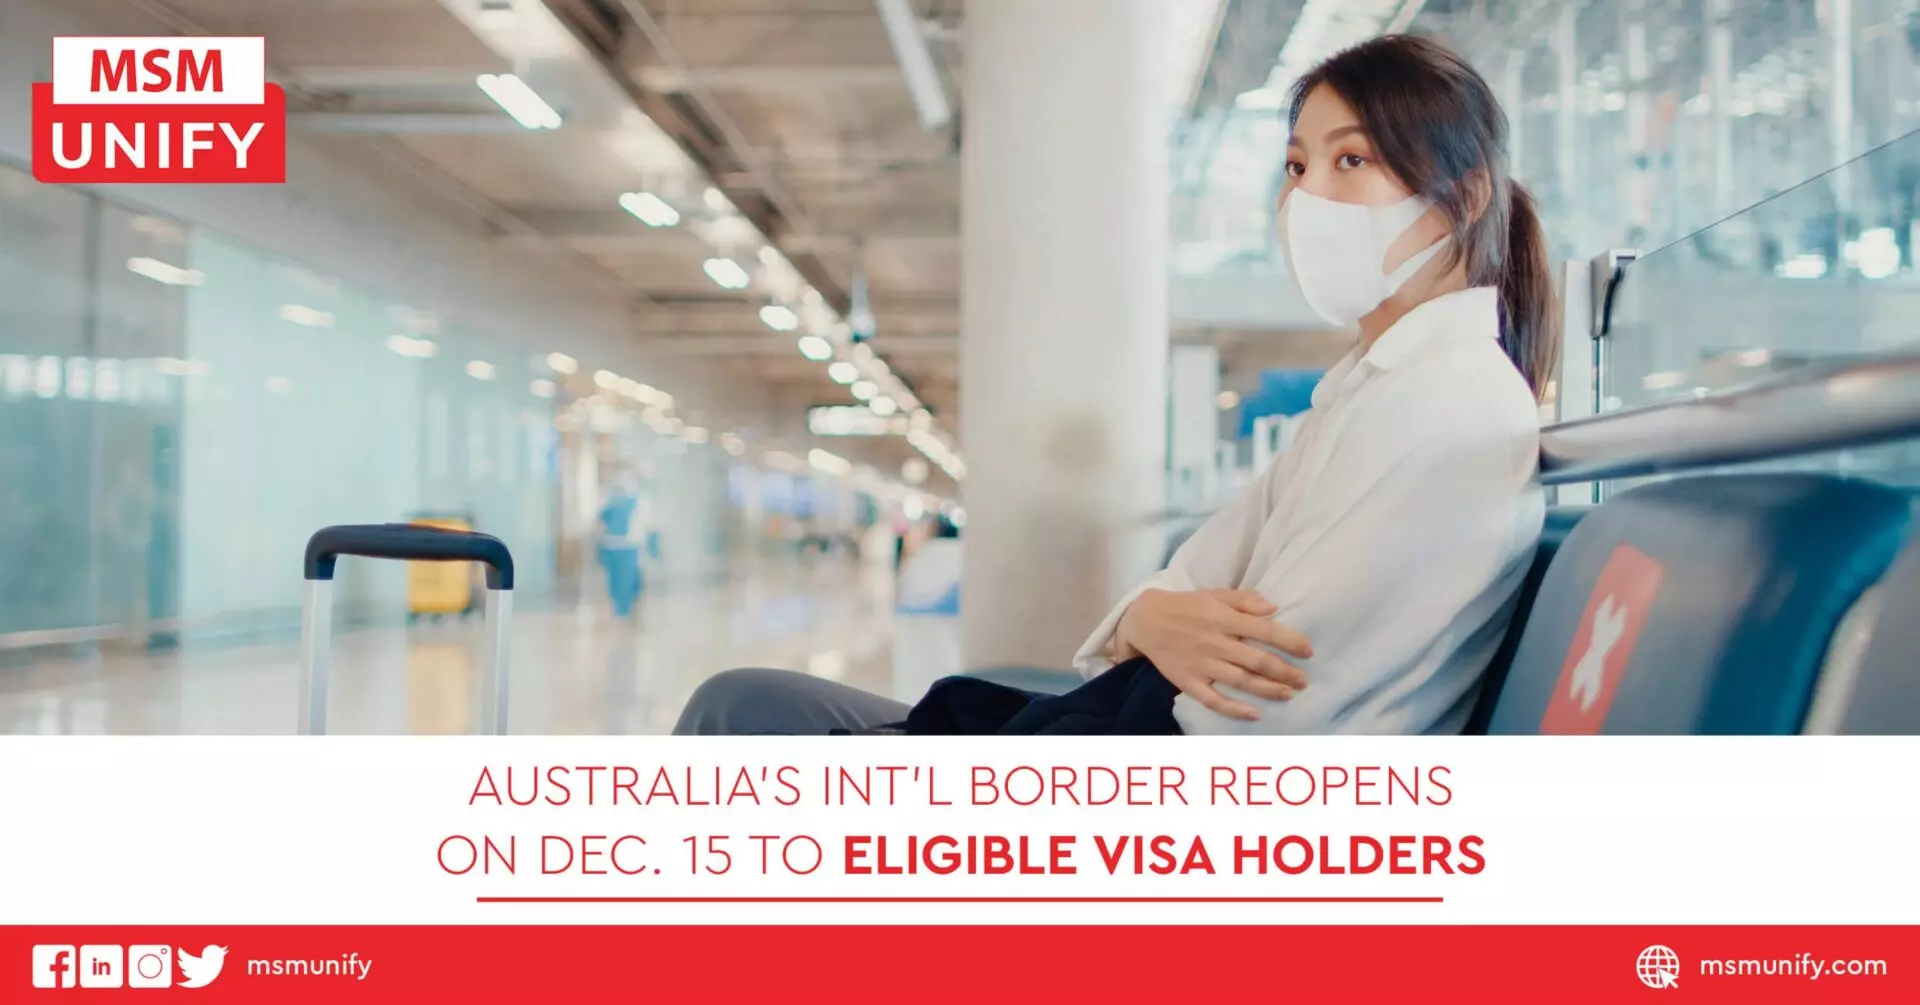 Australias Intl Border Reopens on Dec. 15 to Eligible Visa Holders scaled 1